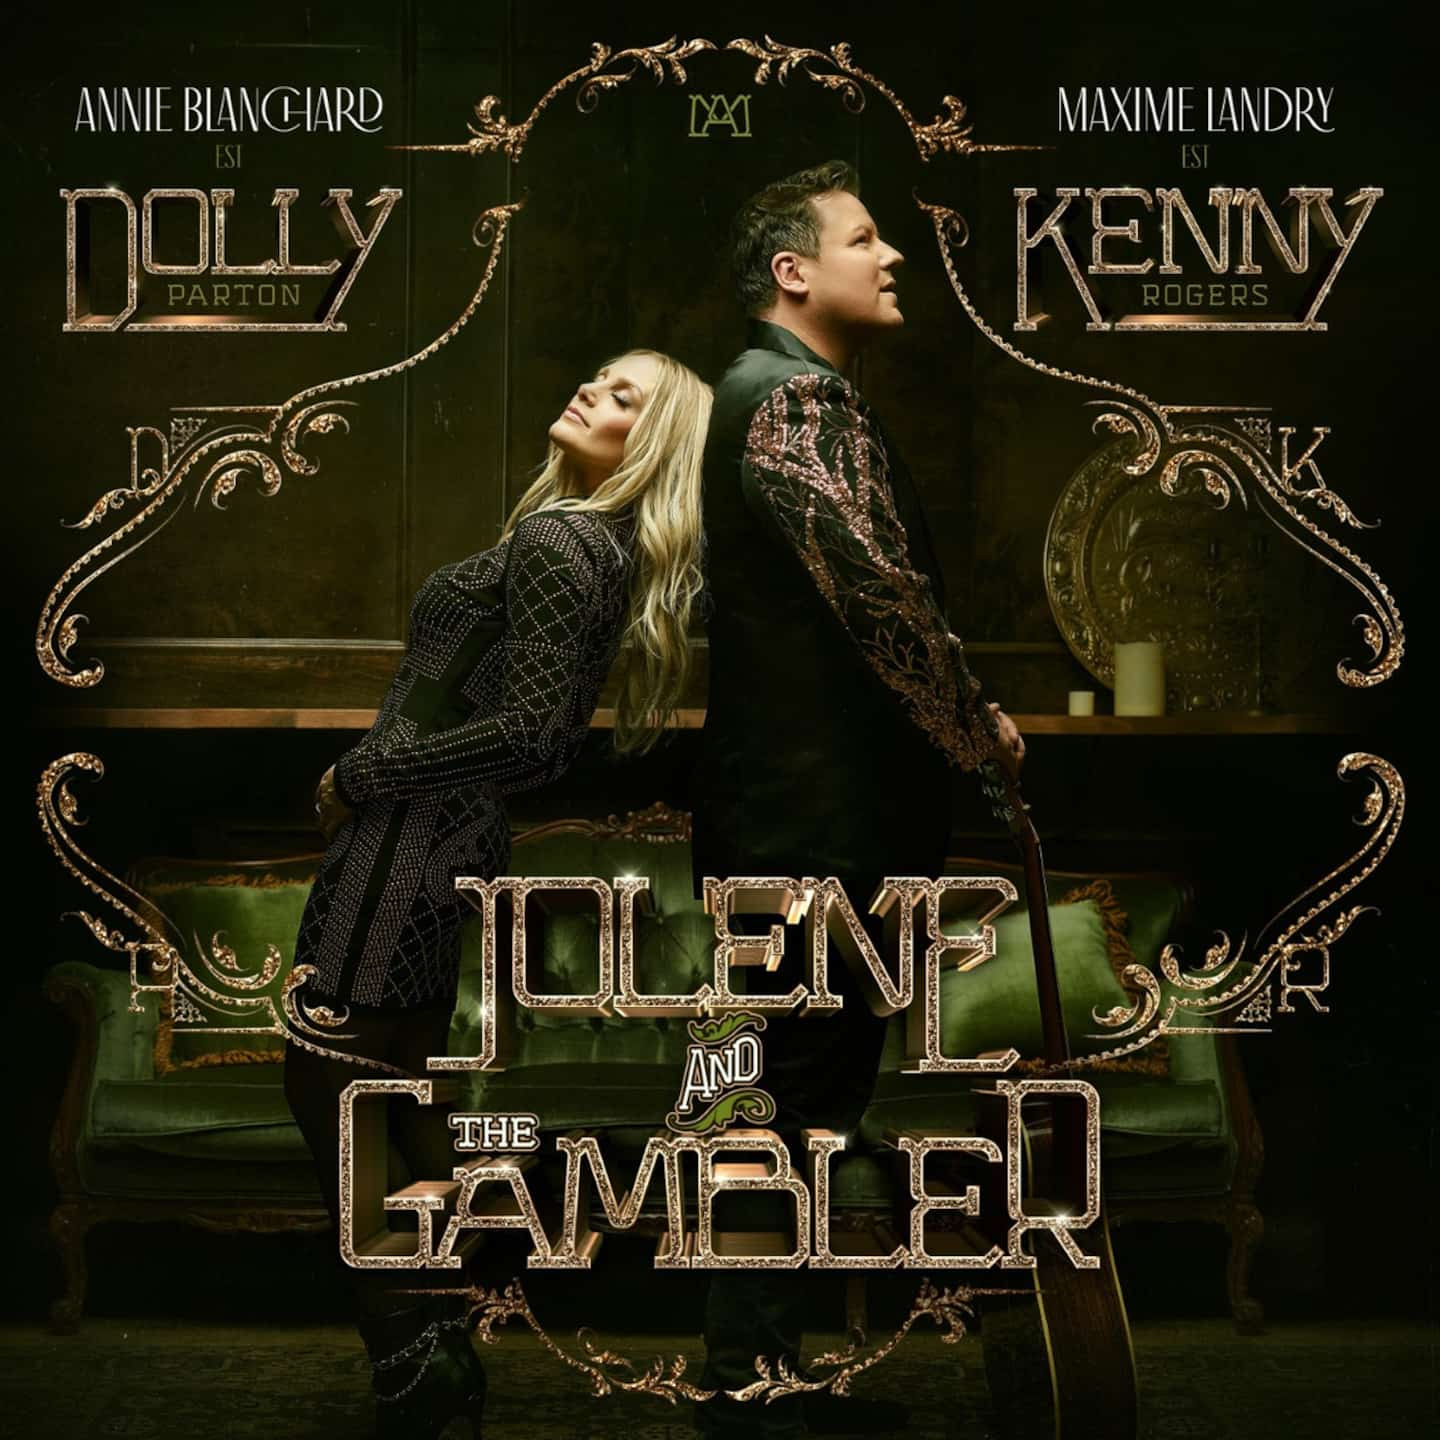 “Jolene and The Gambler”: Annie Blanchard and Maxime Landry pay tribute to Kenny Rogers and Dolly Parton